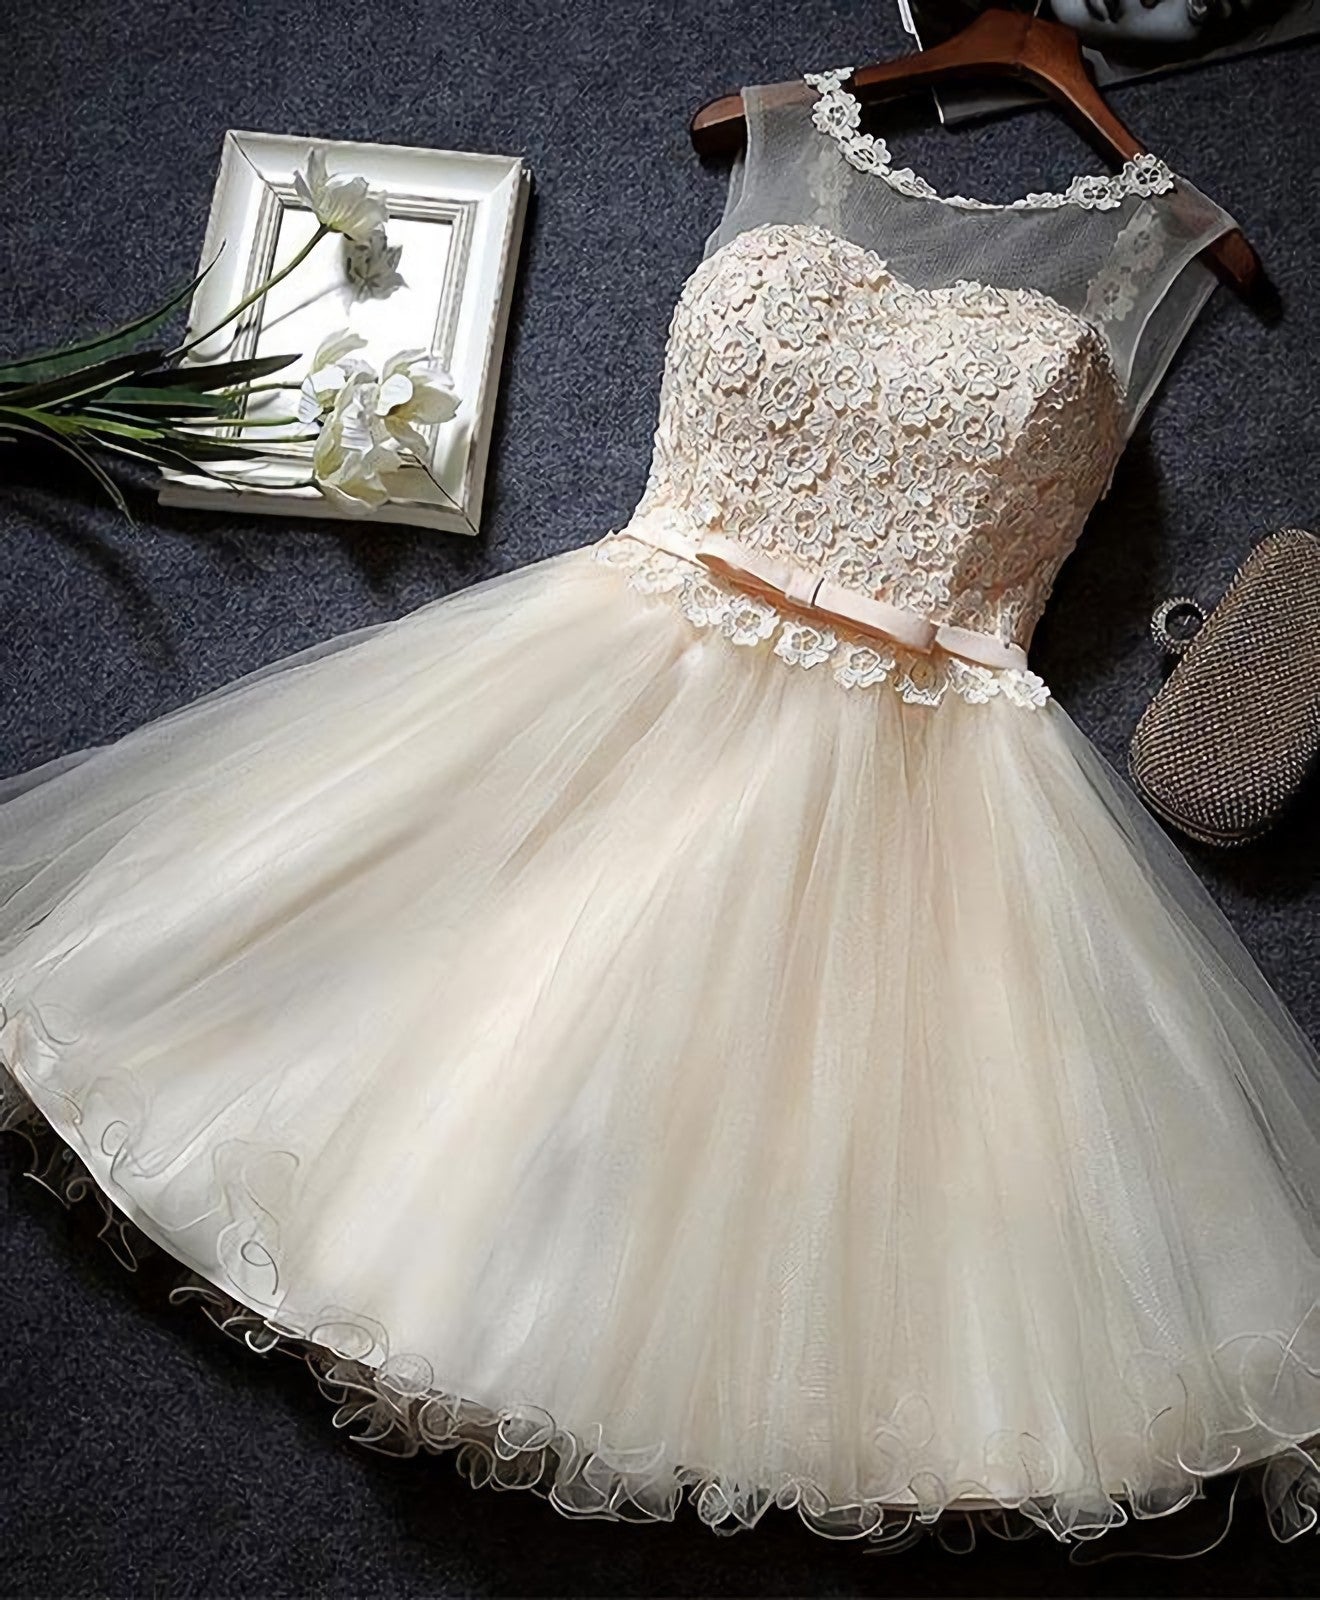 Cute Champagne A Line Lace Short Corset Prom Dress, Corset Homecoming Dress outfit, Orange Dress